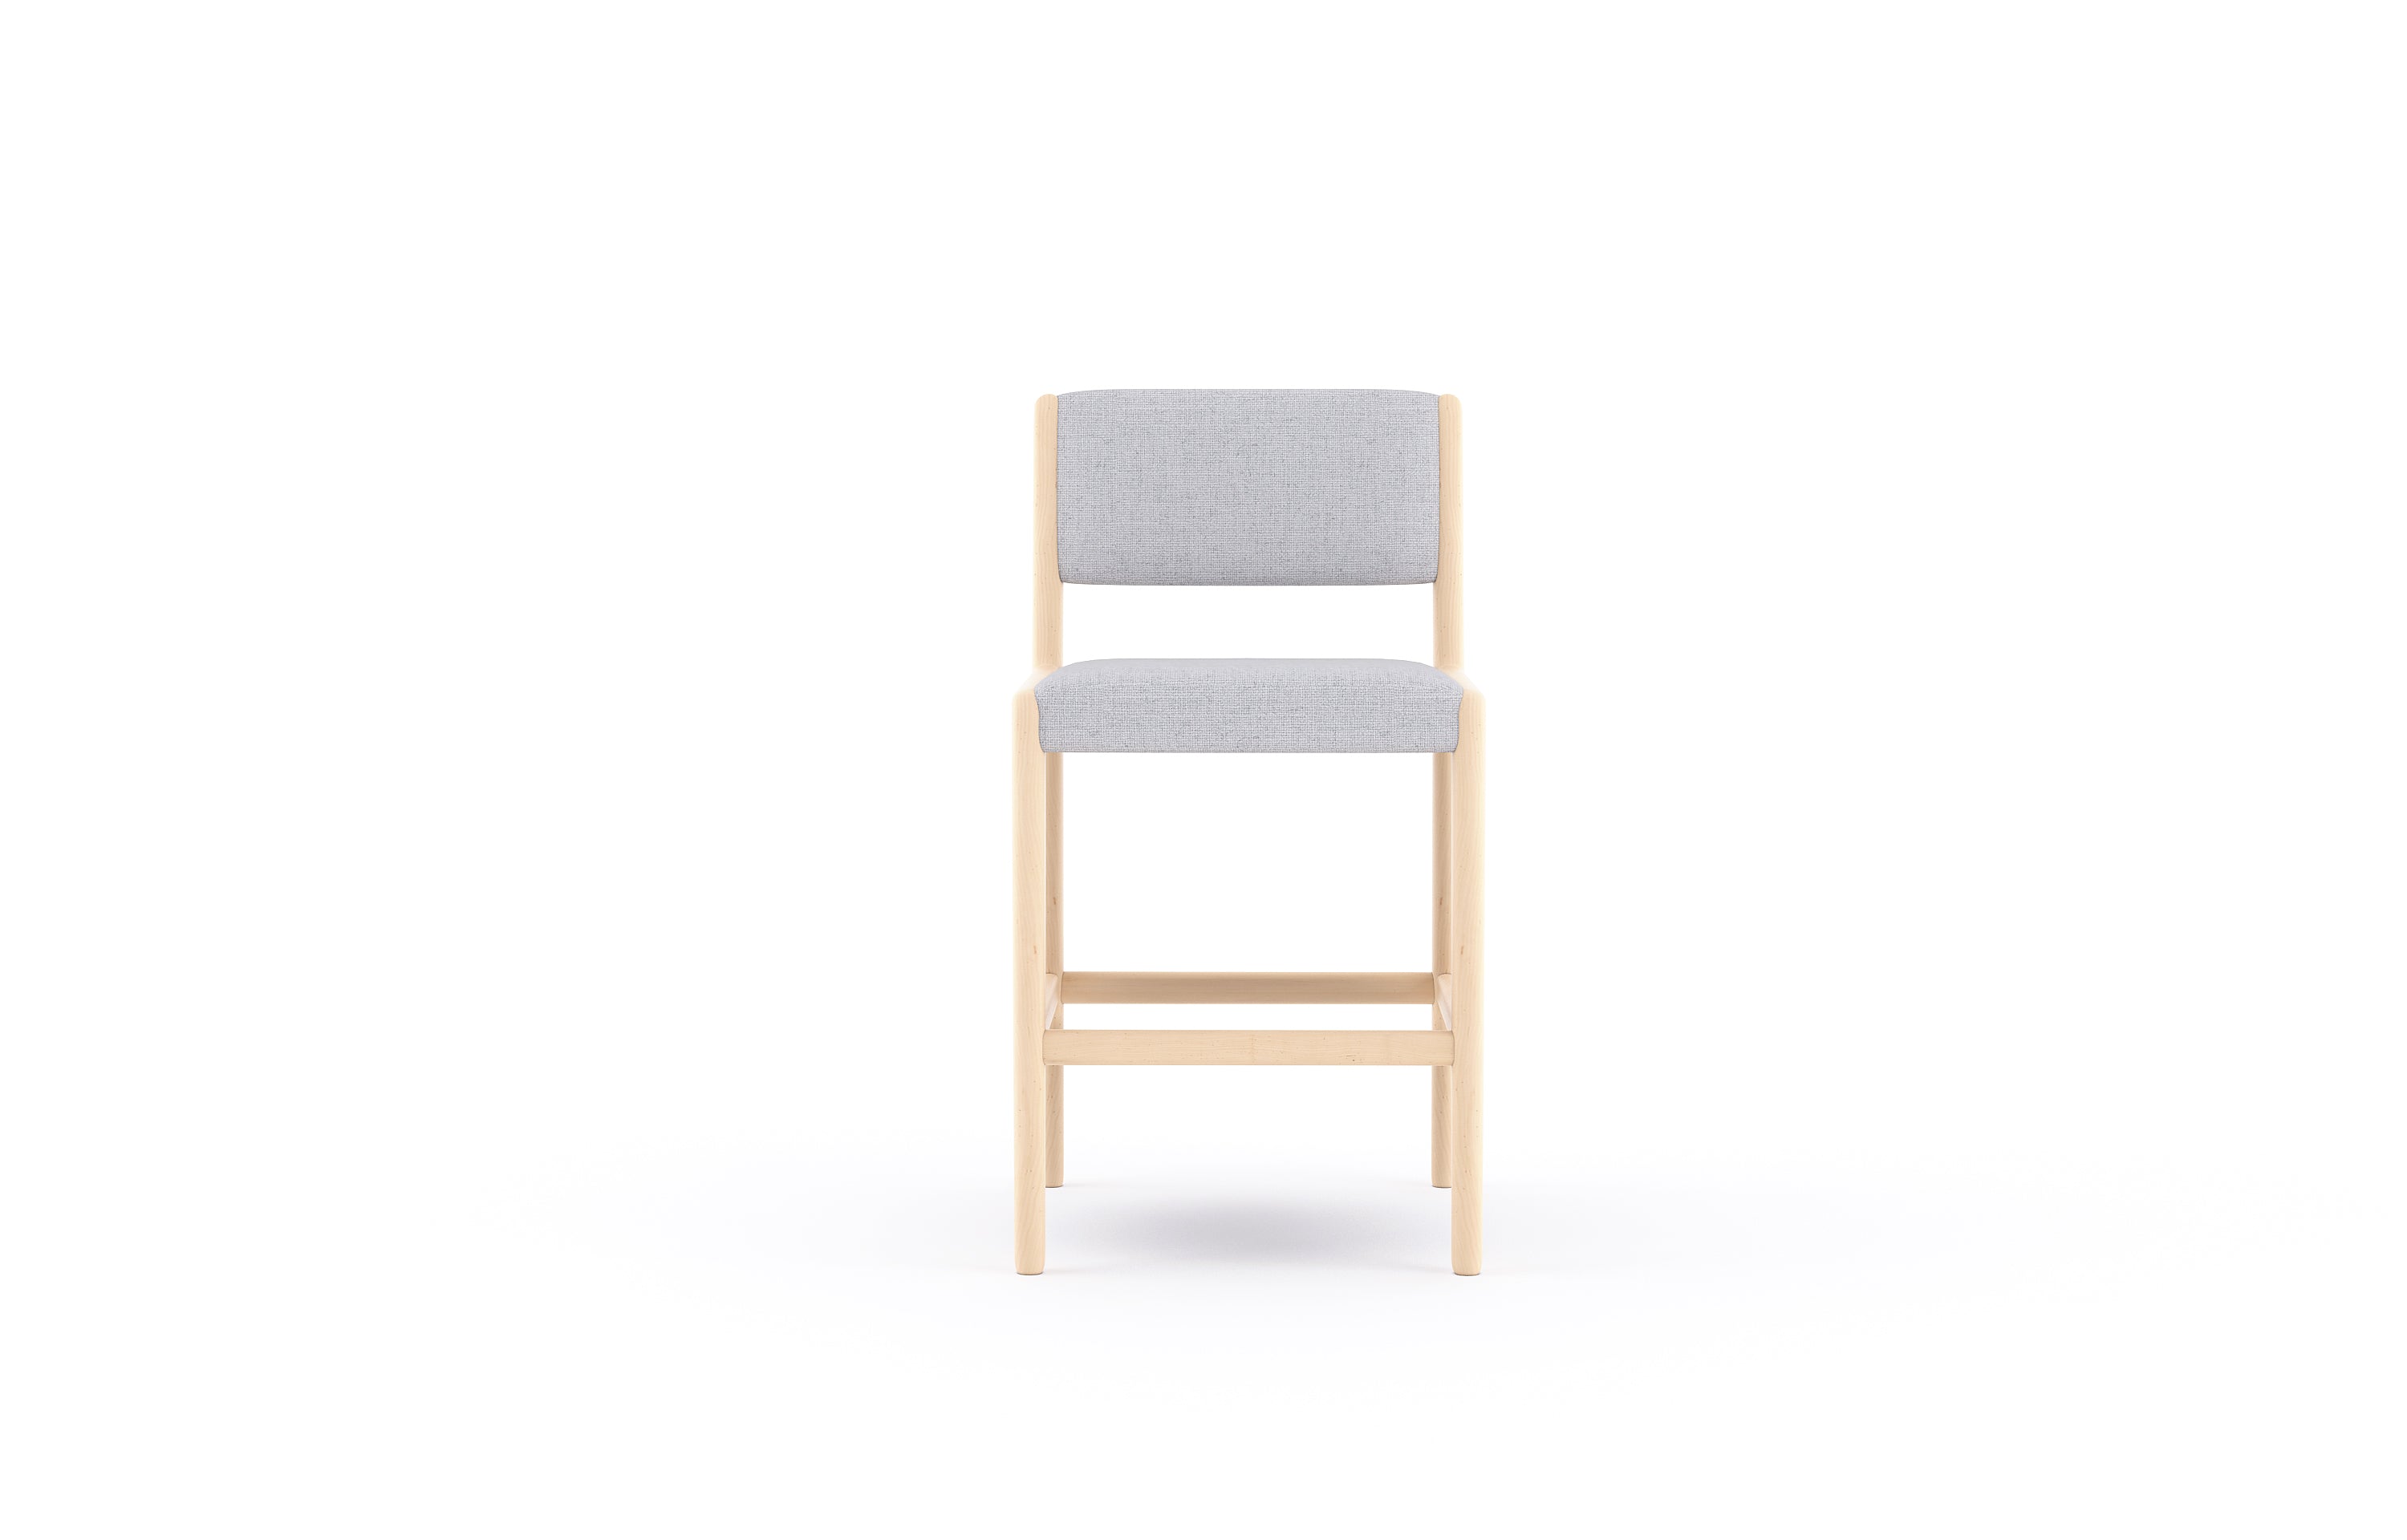 G: Counter Stool shown in Texture Haze fabric and maple frame